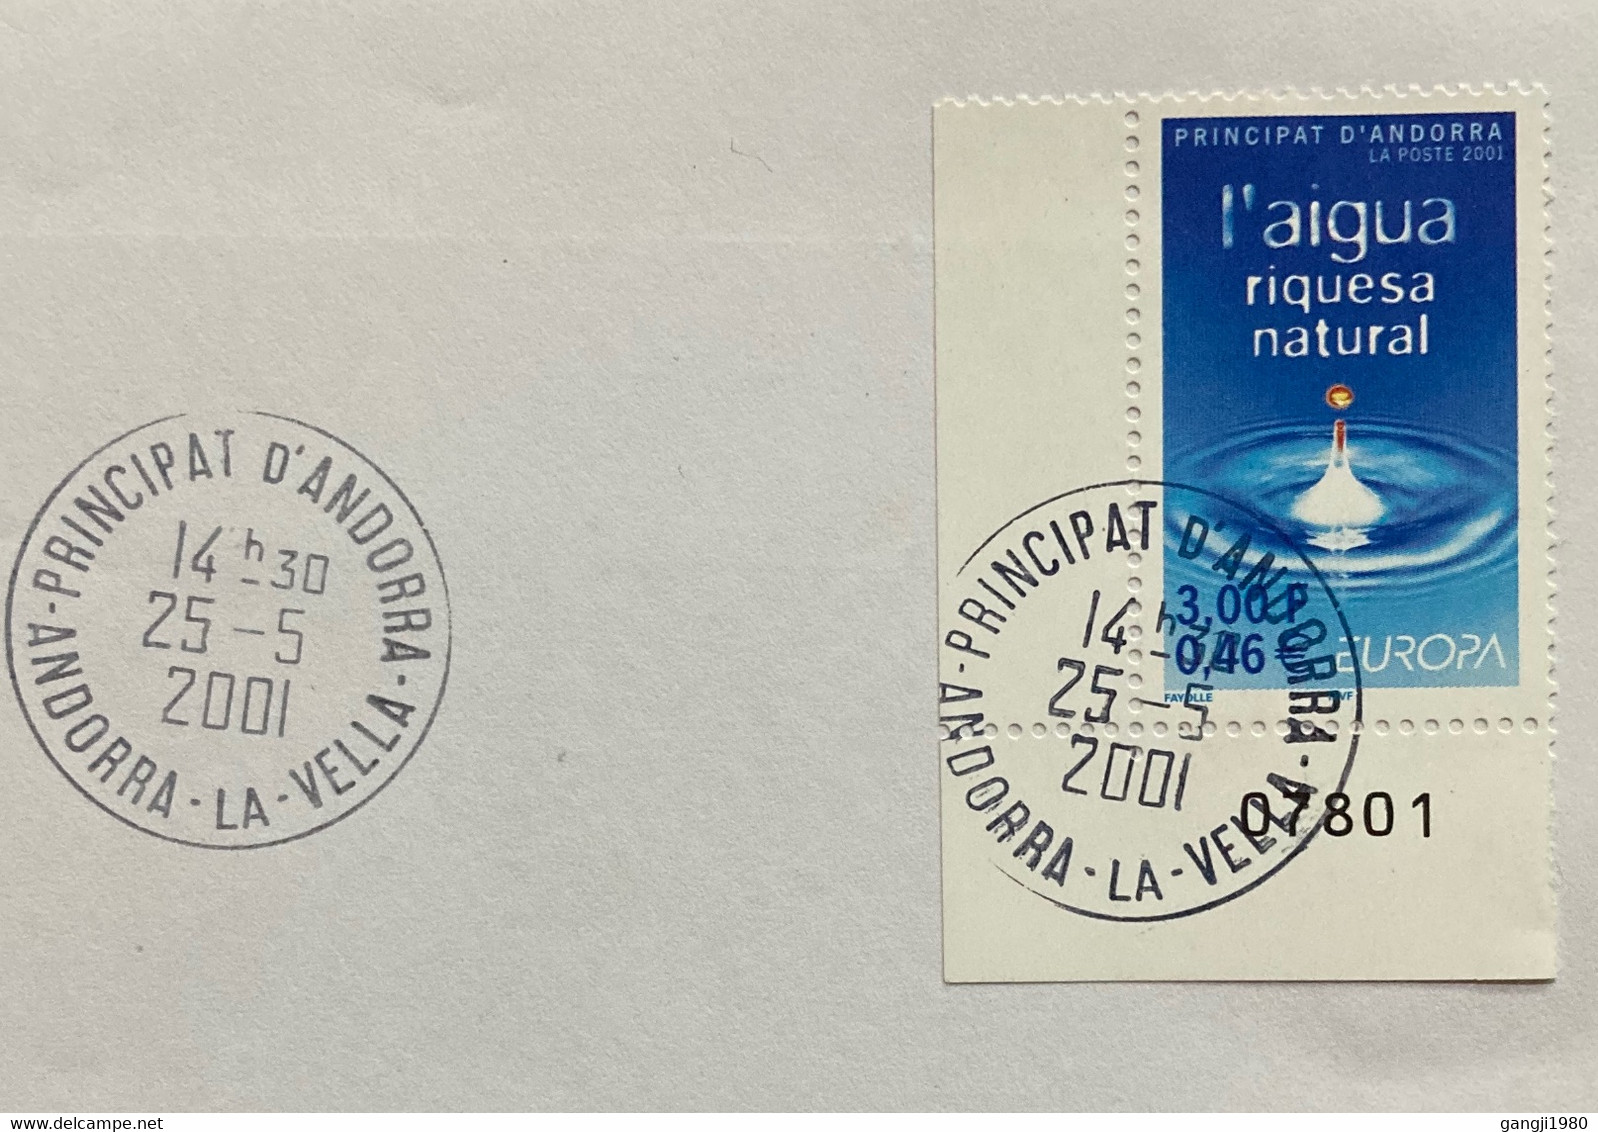 ANDORRA 2001,TRANSCULTURAL PSYCHOLOGY,ILLUSTRATED SPECIAL USED COVER, EUROPA,NAIGUA RIQUESA NATURAL, STAMP PLATET NUMBER - Storia Postale